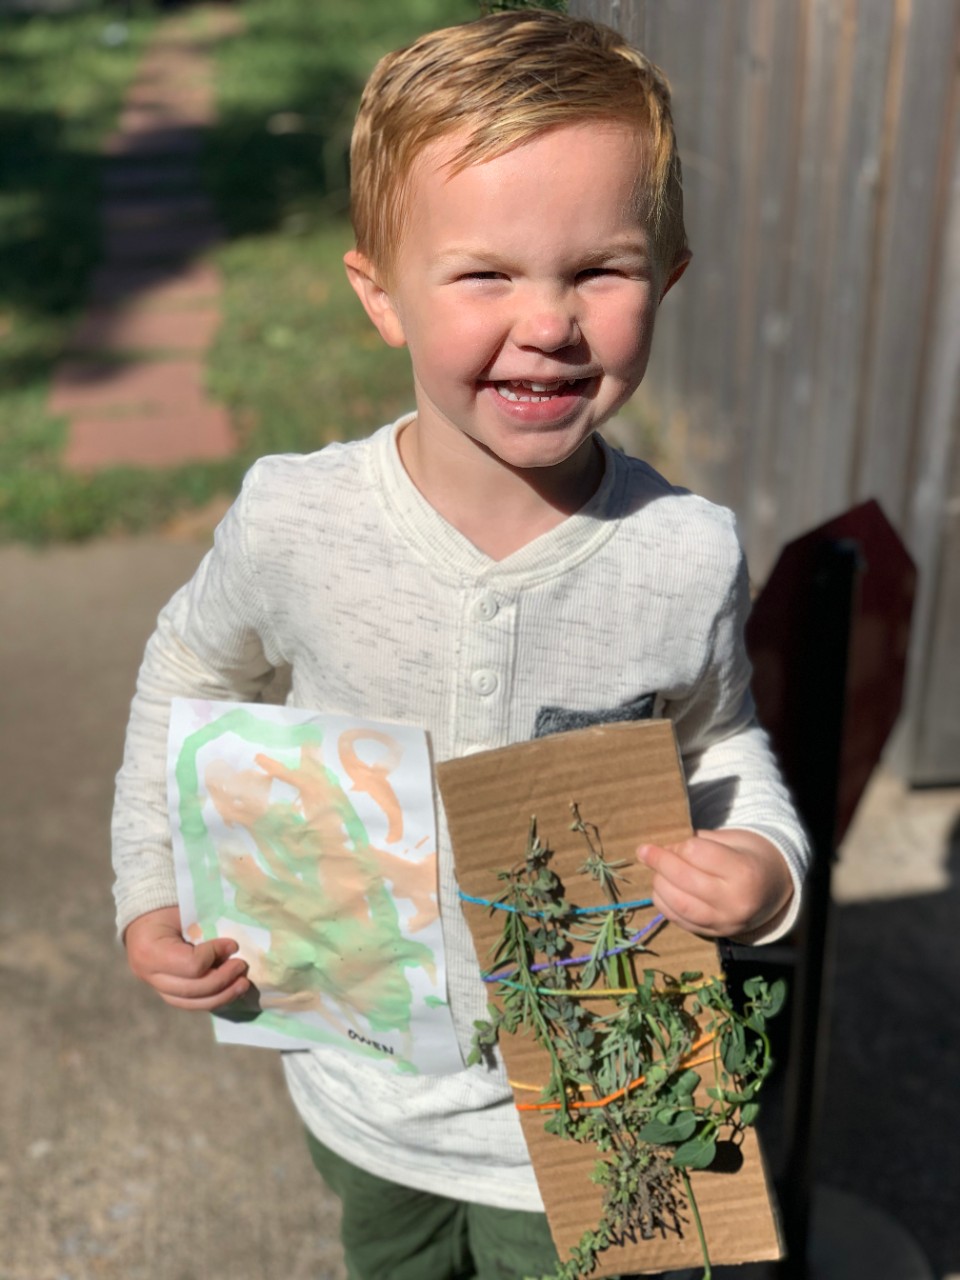 Child holding art project